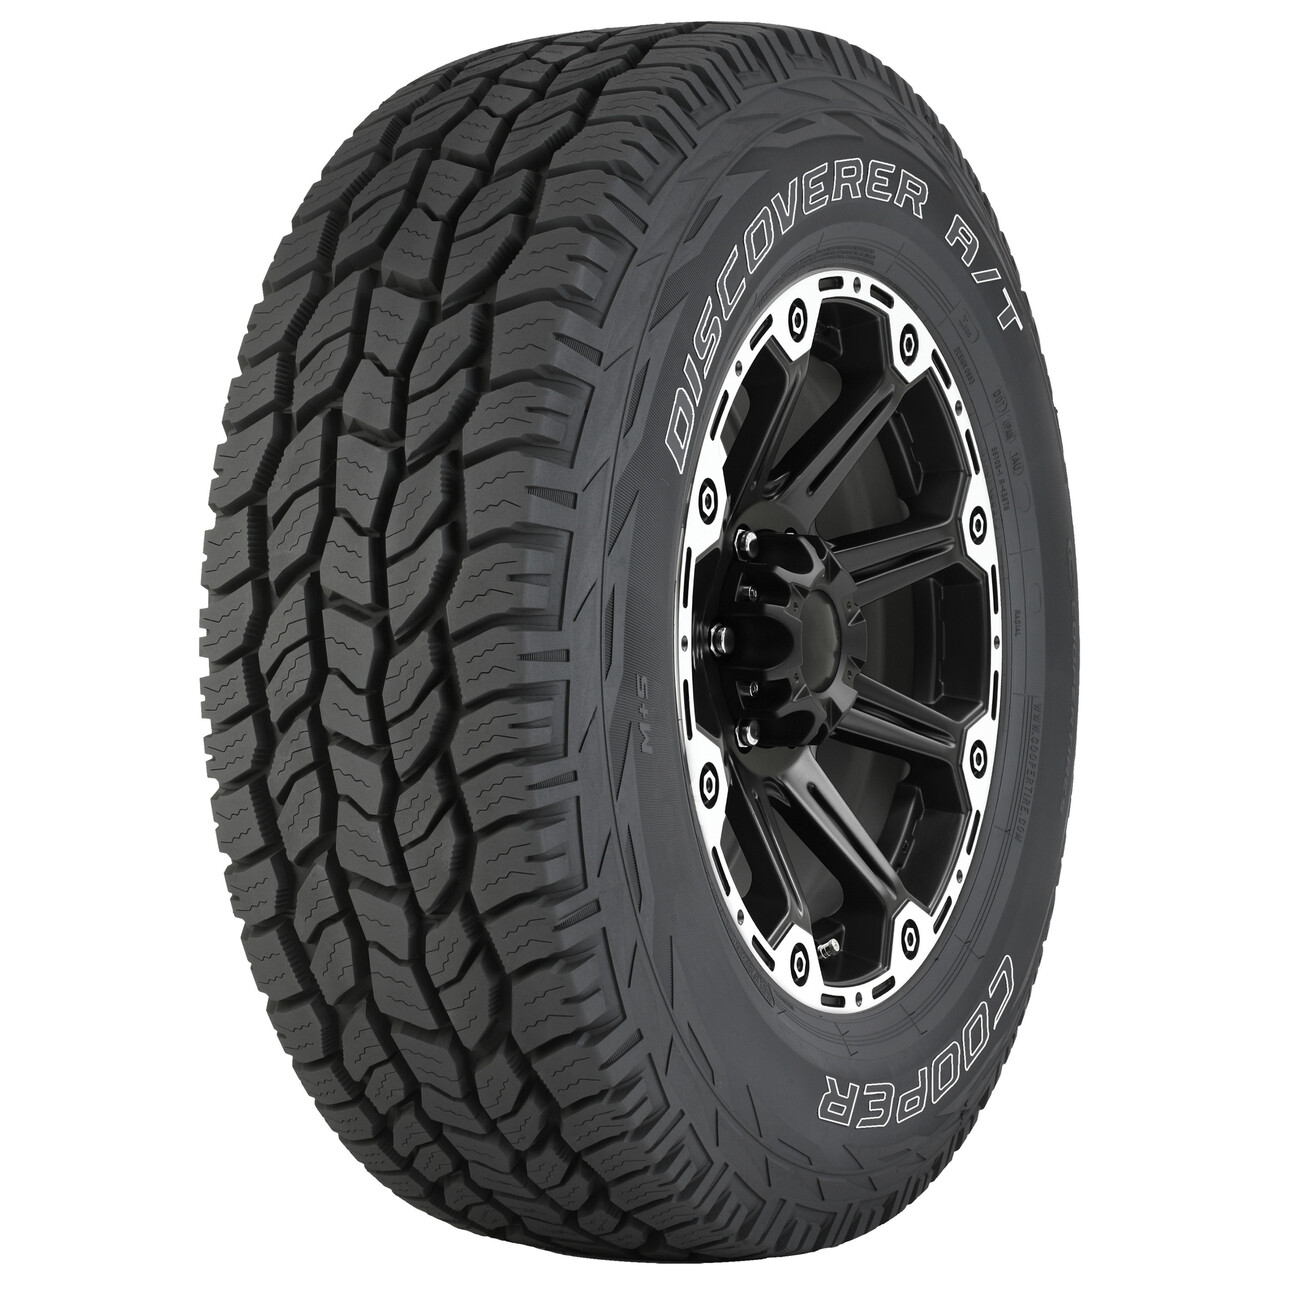 Cooper Discoverer A/T All-Season 275/55R20 117T Tire Fits: 2014-18 Chevrolet Silverado 1500 High Country, 2011-18 GMC Sierra 1500 Denali - image 1 of 8